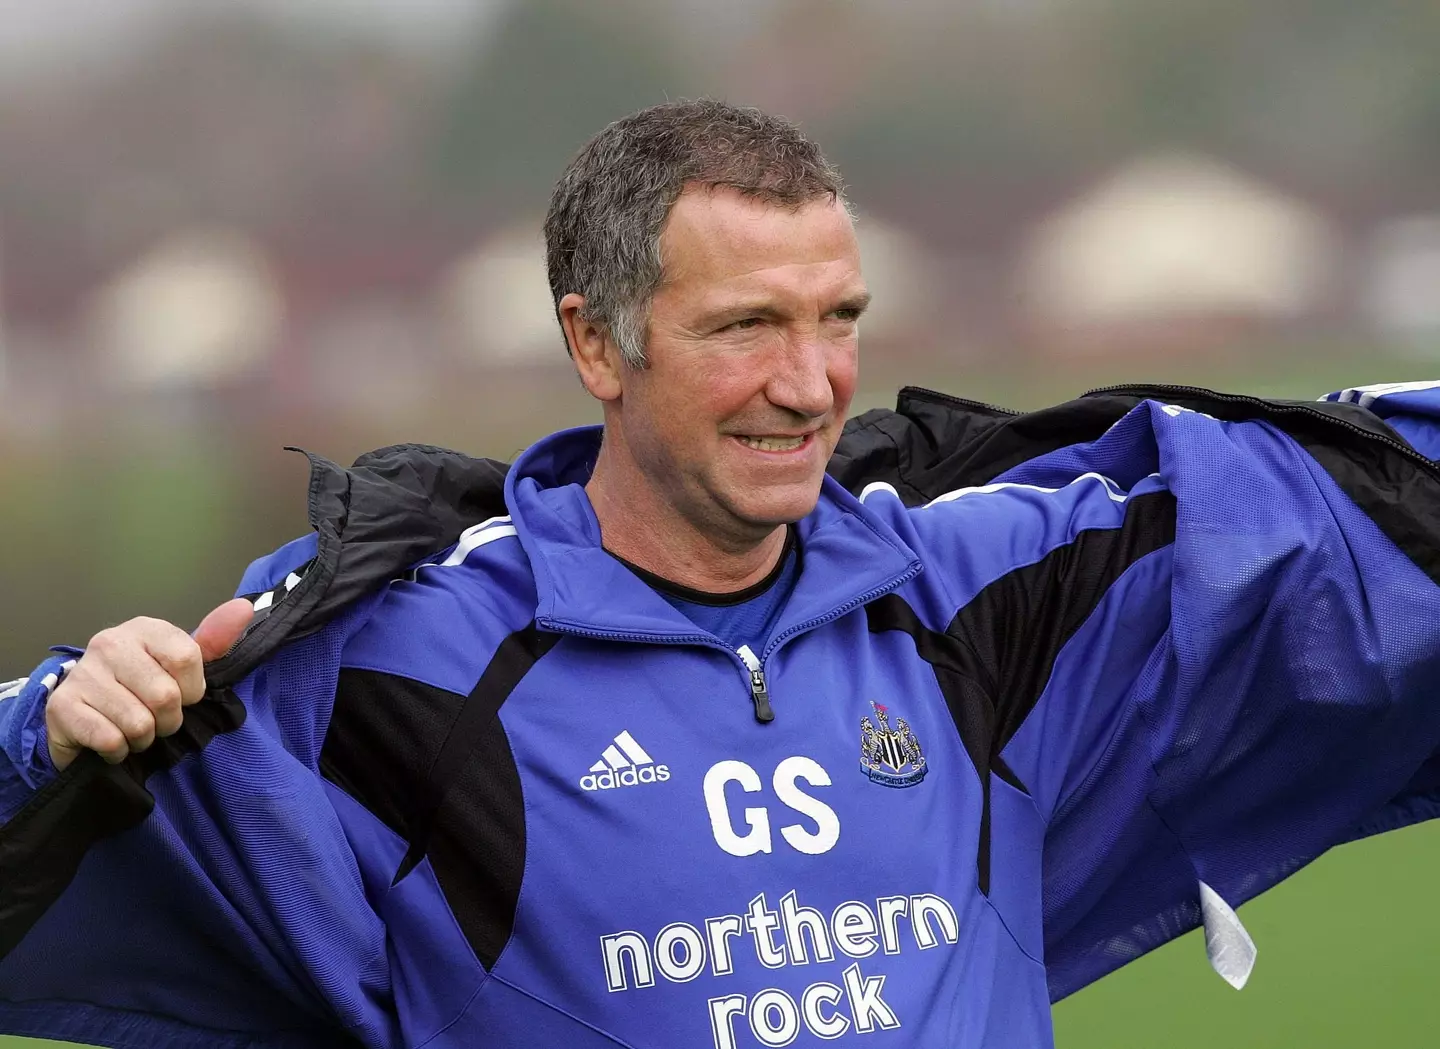 Souness was appointed Newcastle manager in 2004 after the club sacked Sir Bobby Robson (Image credit: PA)